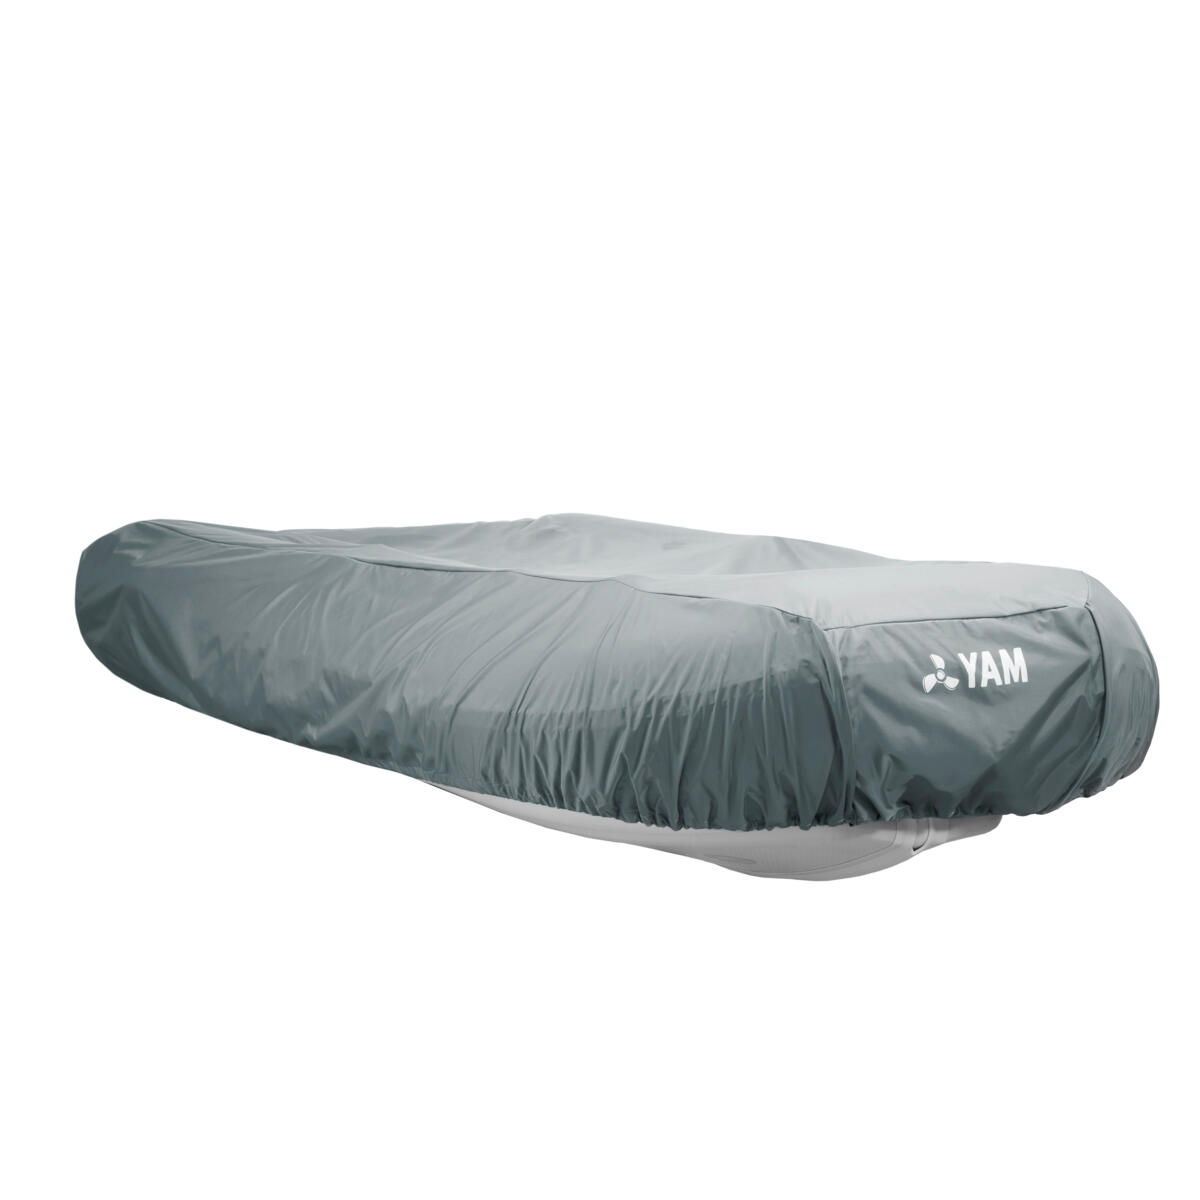 Ideal for storage and protection from the elements, this cover prolongs the life of your boat.